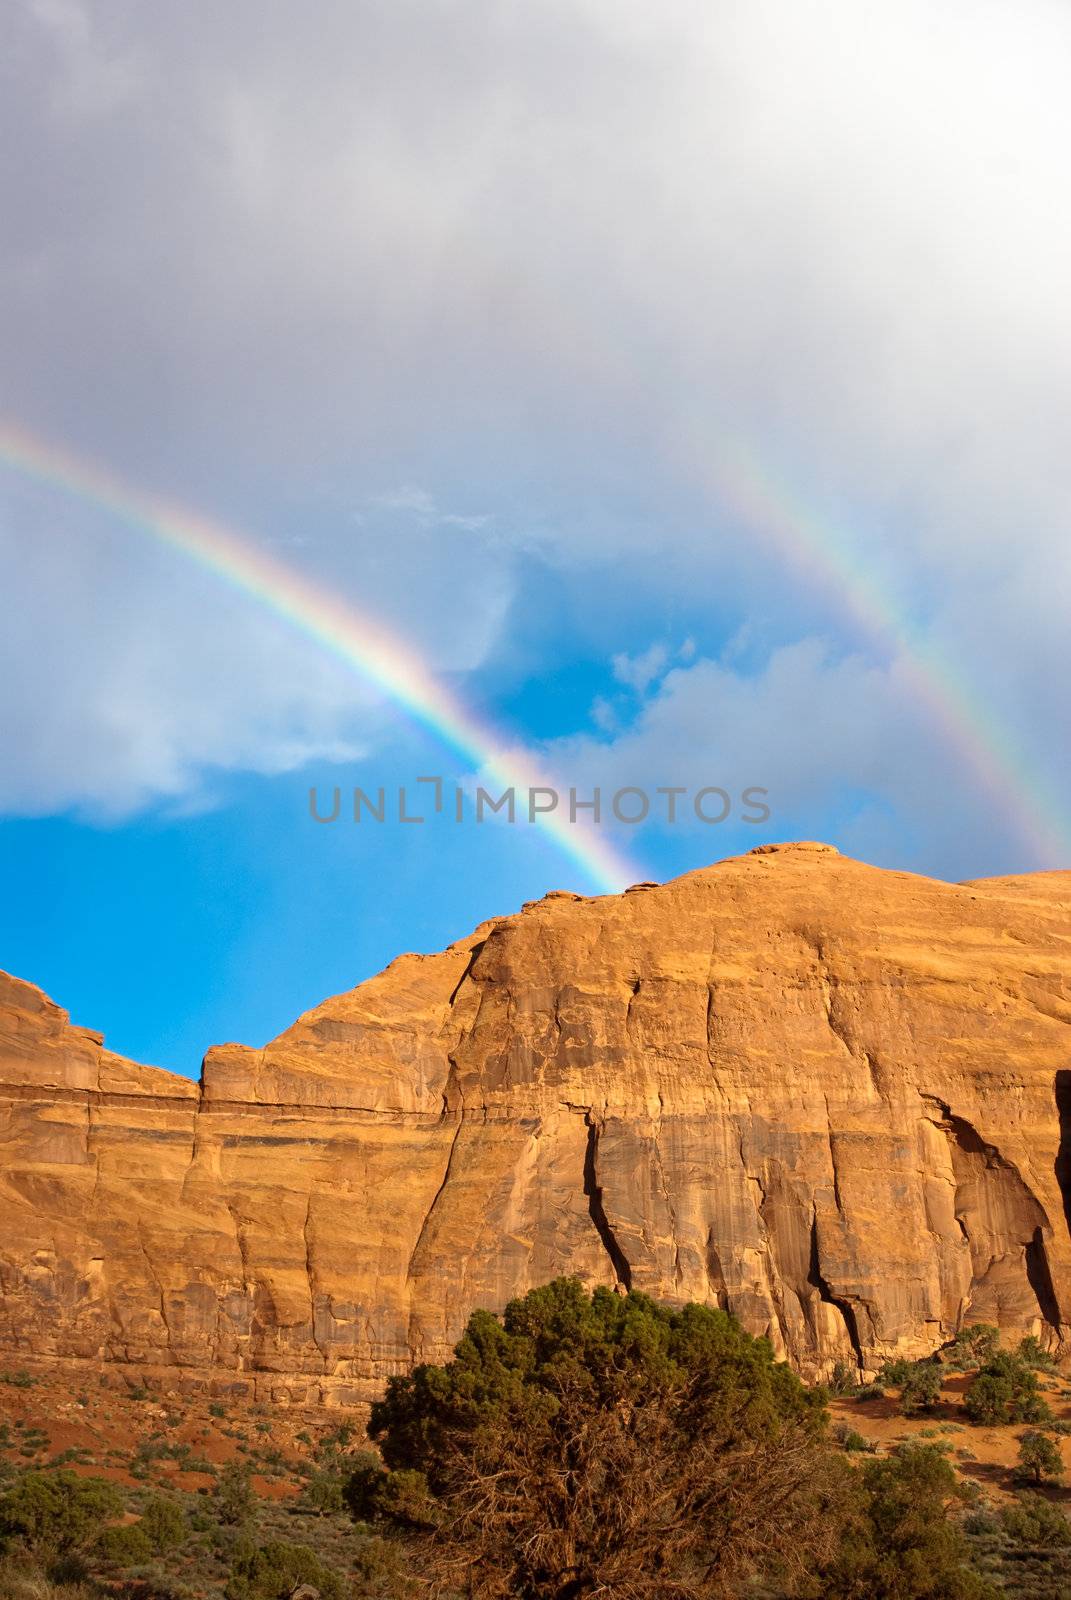 Double Rainbow over Monument Valley after a storm by emattil